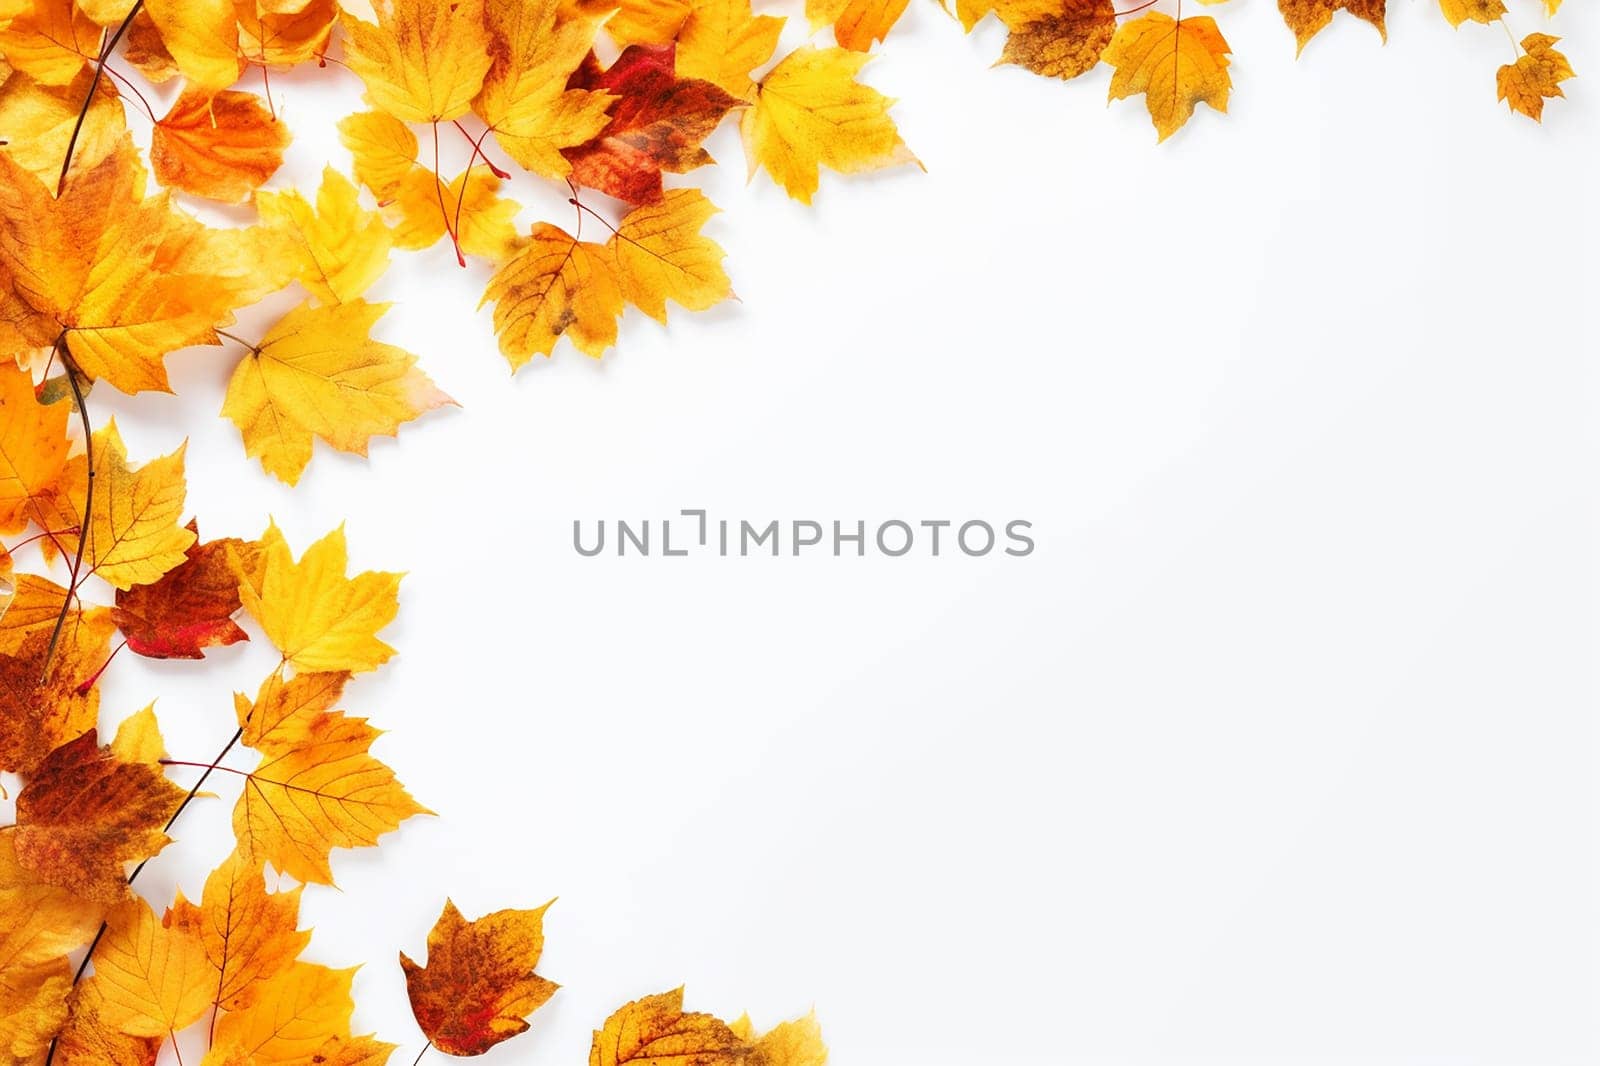 Autumn leaves border on white background with space for text